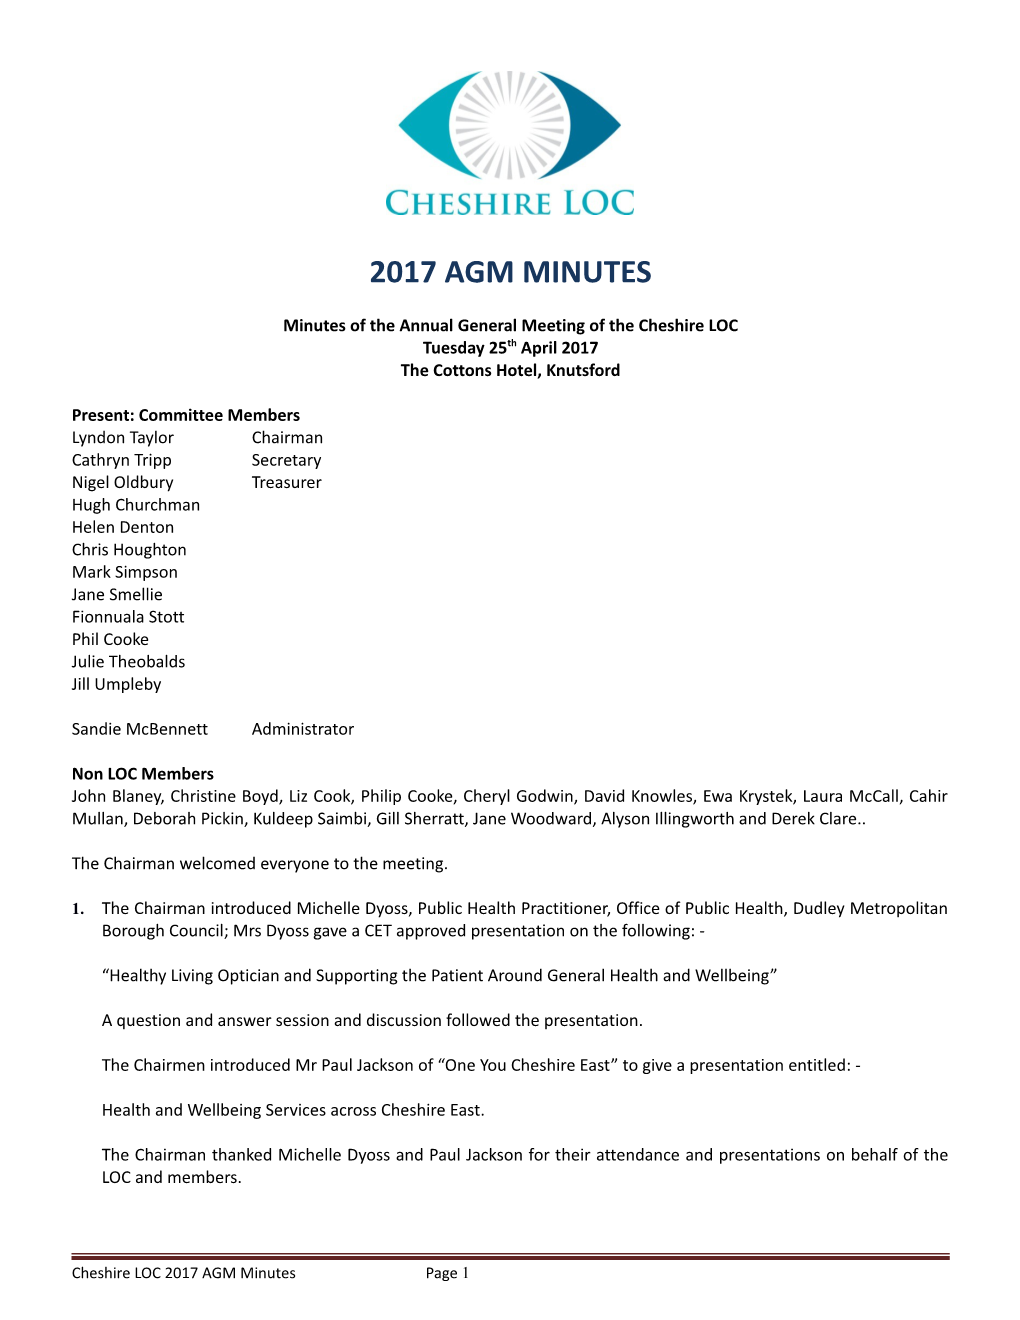 Minutes of the Annual General Meeting of the Cheshire LOC